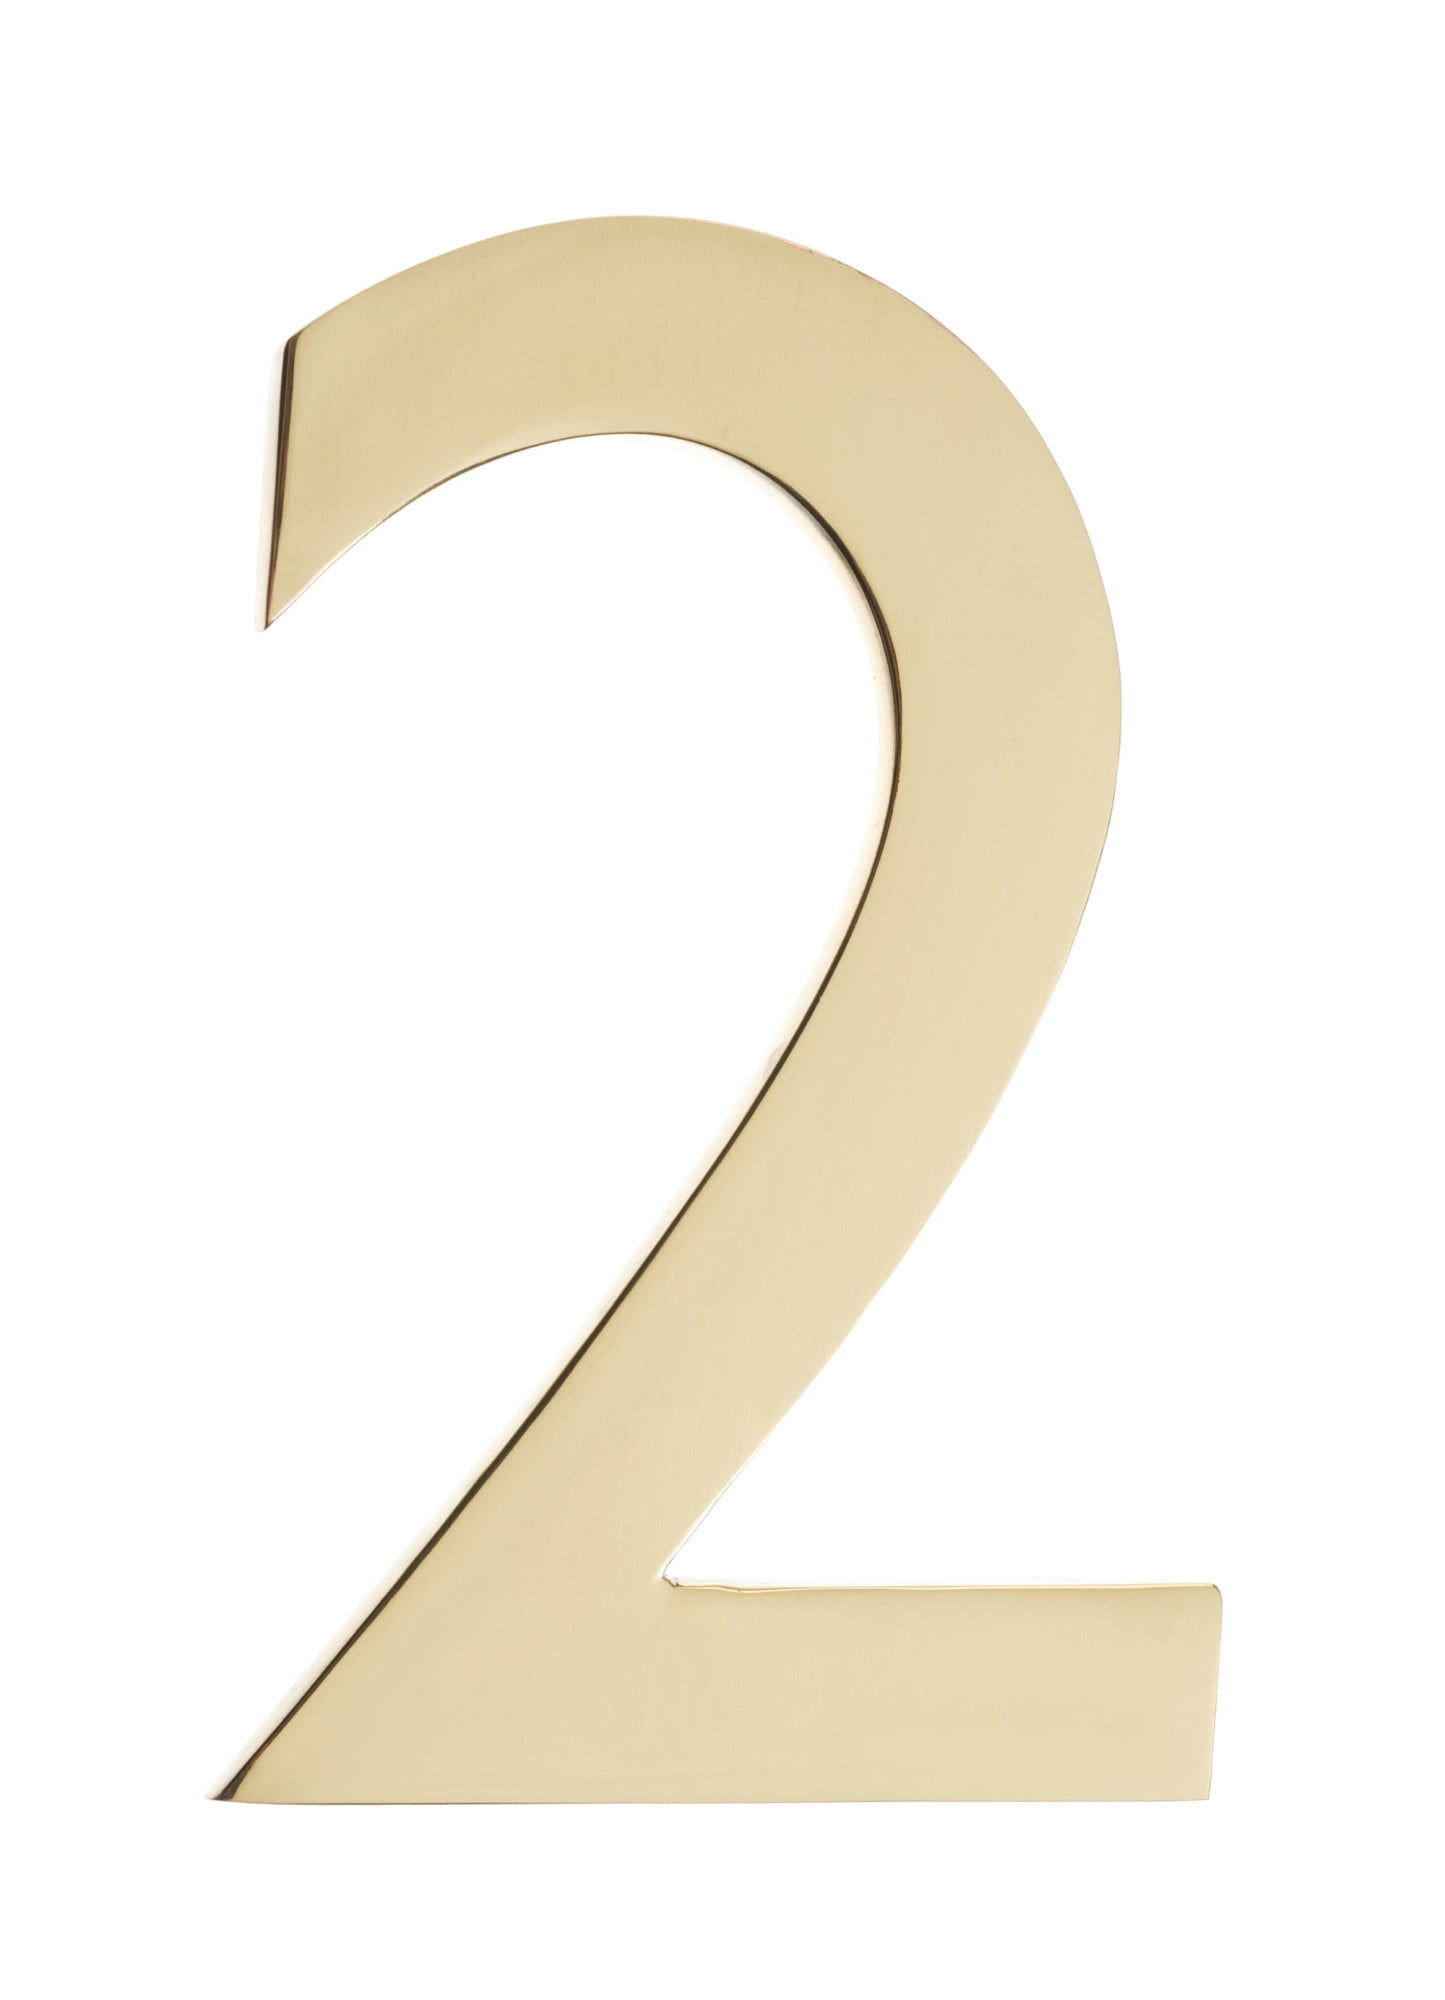 3582pb-2 Floating House Number 2, Polished Brass - 4 In.